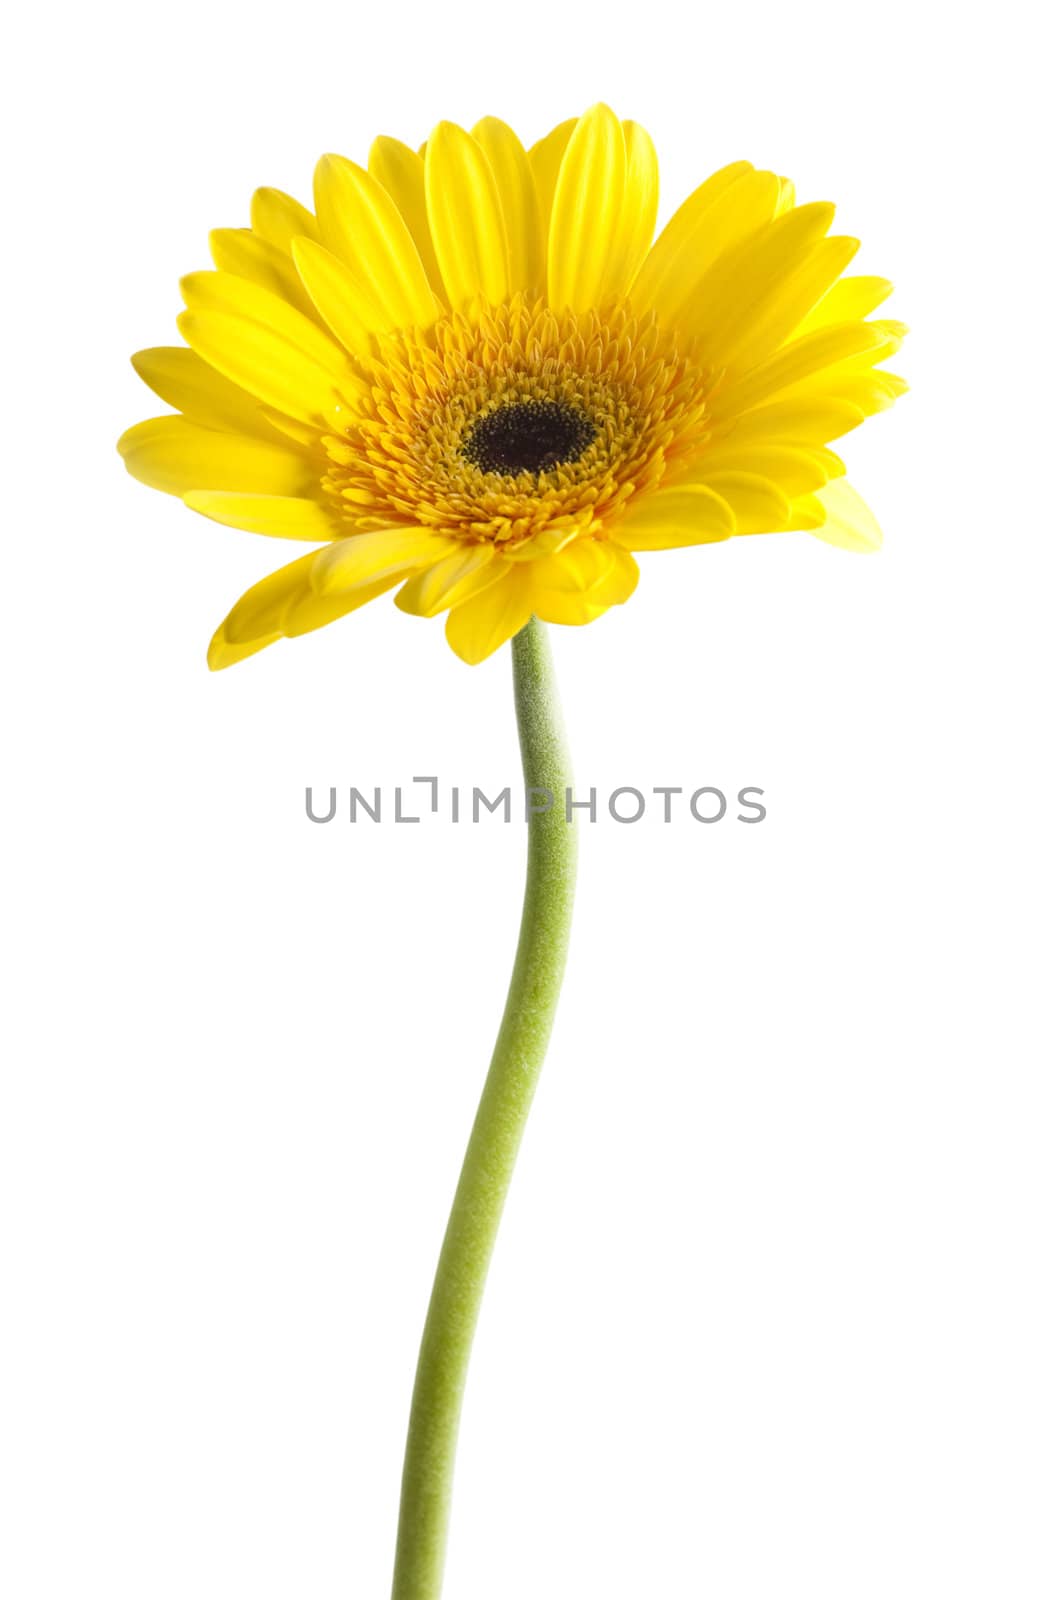 Yellow gerbera flower isolated on white background